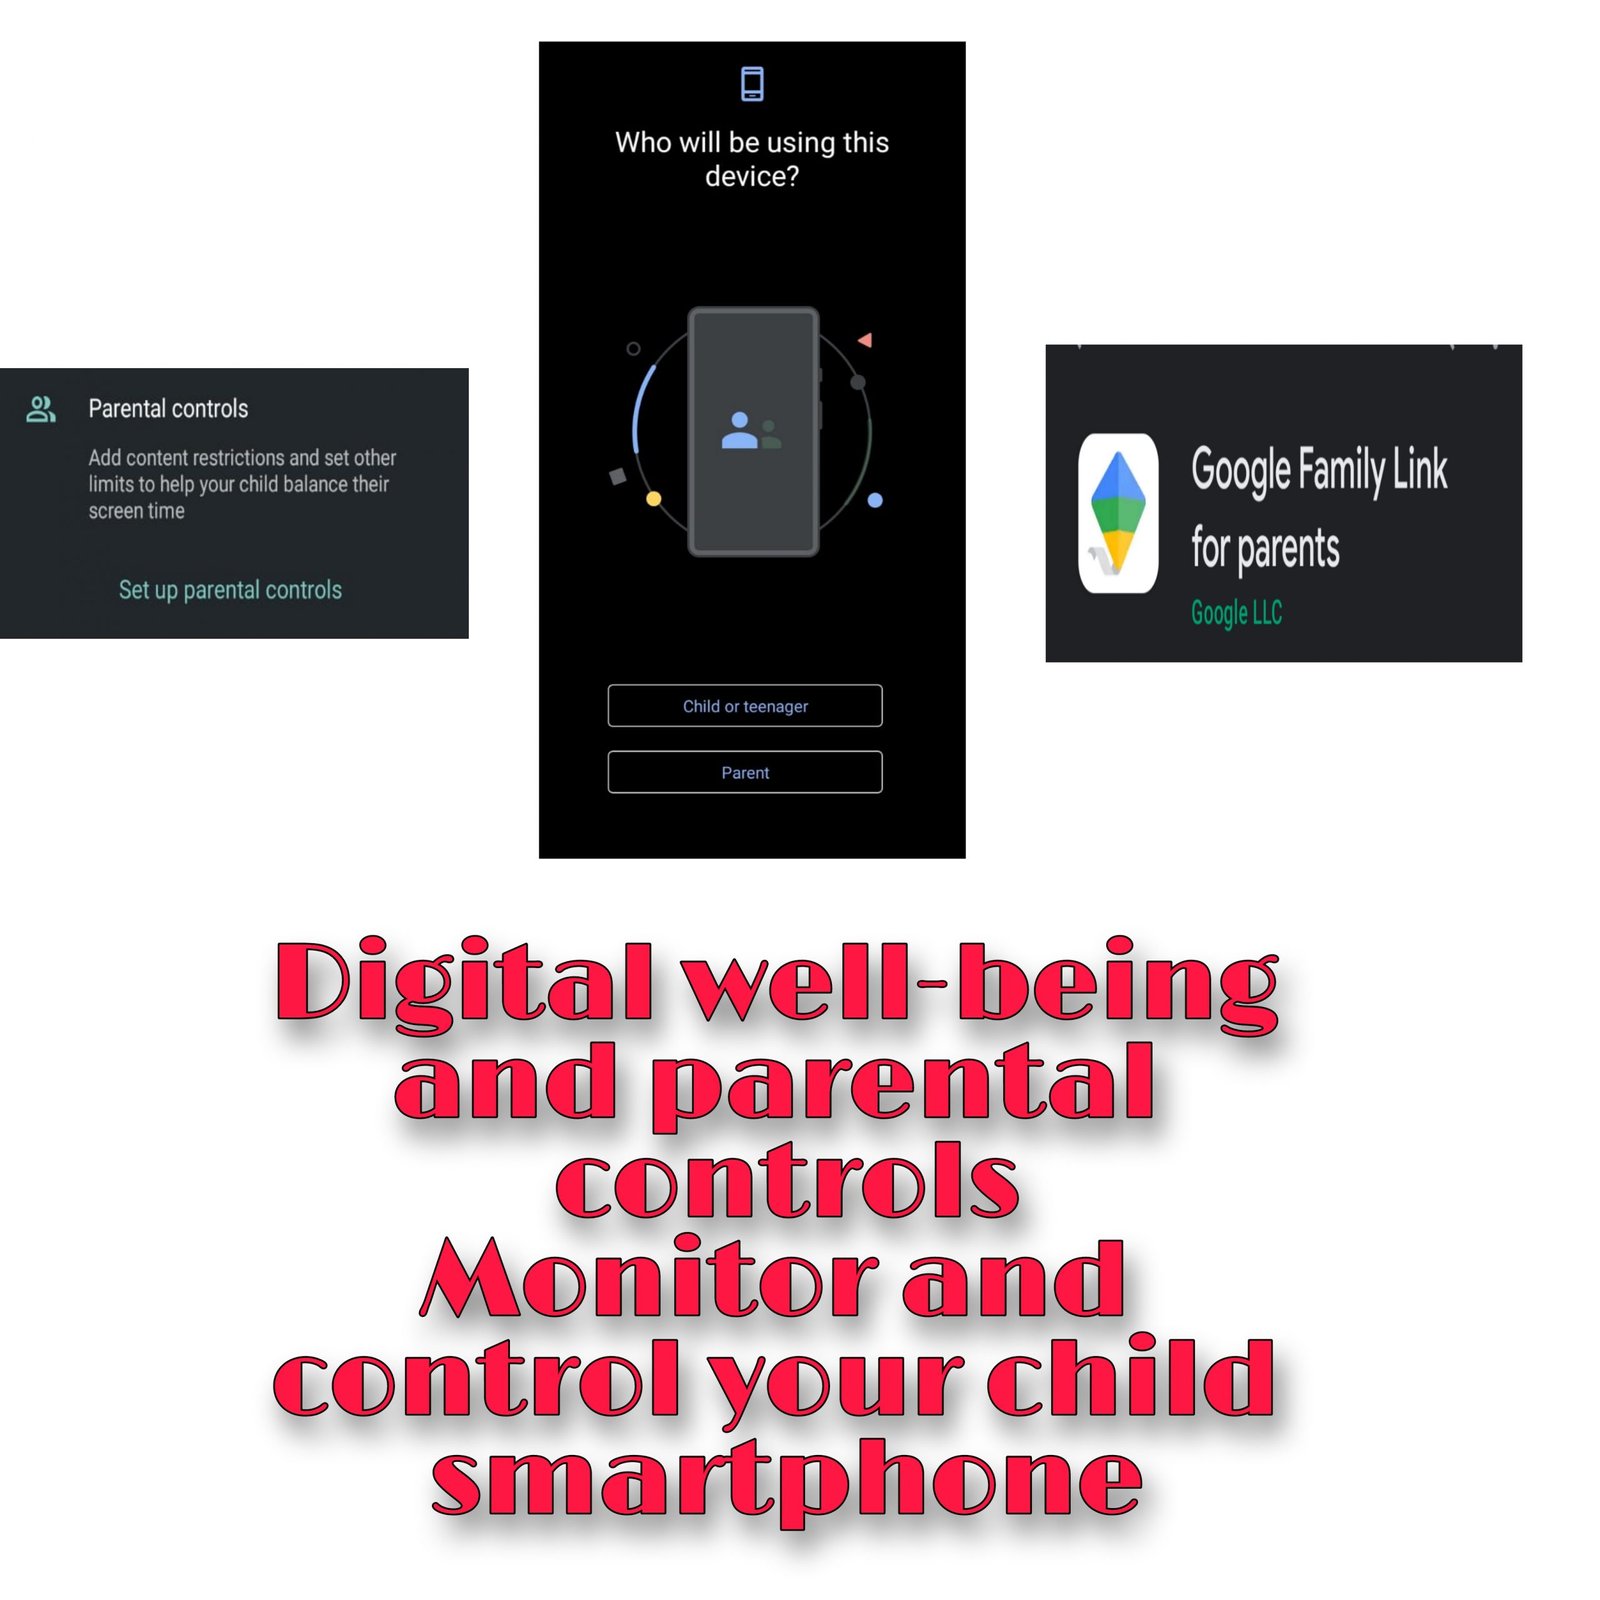 Digital wellbeing and parental controls-Monitor and control your children's smartphones